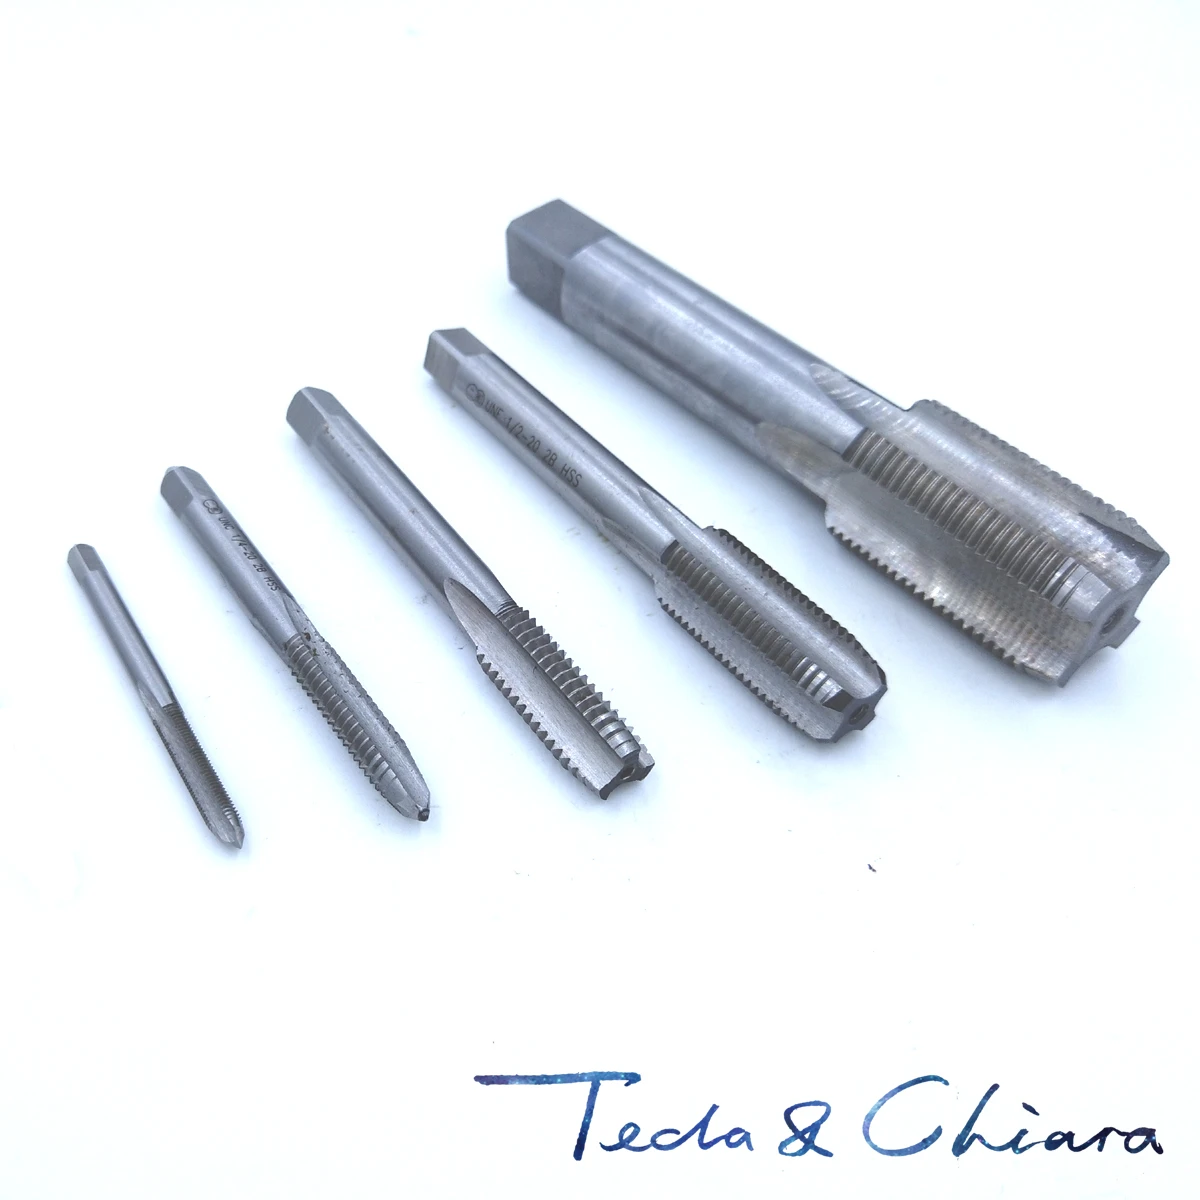 M2 M2.5 M3 M4 M5 M6 M7 M8 M9 M10 M12 M13 M14 M16 M18 M20 Metric HSS Left Hand Tap Pitch Threading Tools For Mold Machining LH